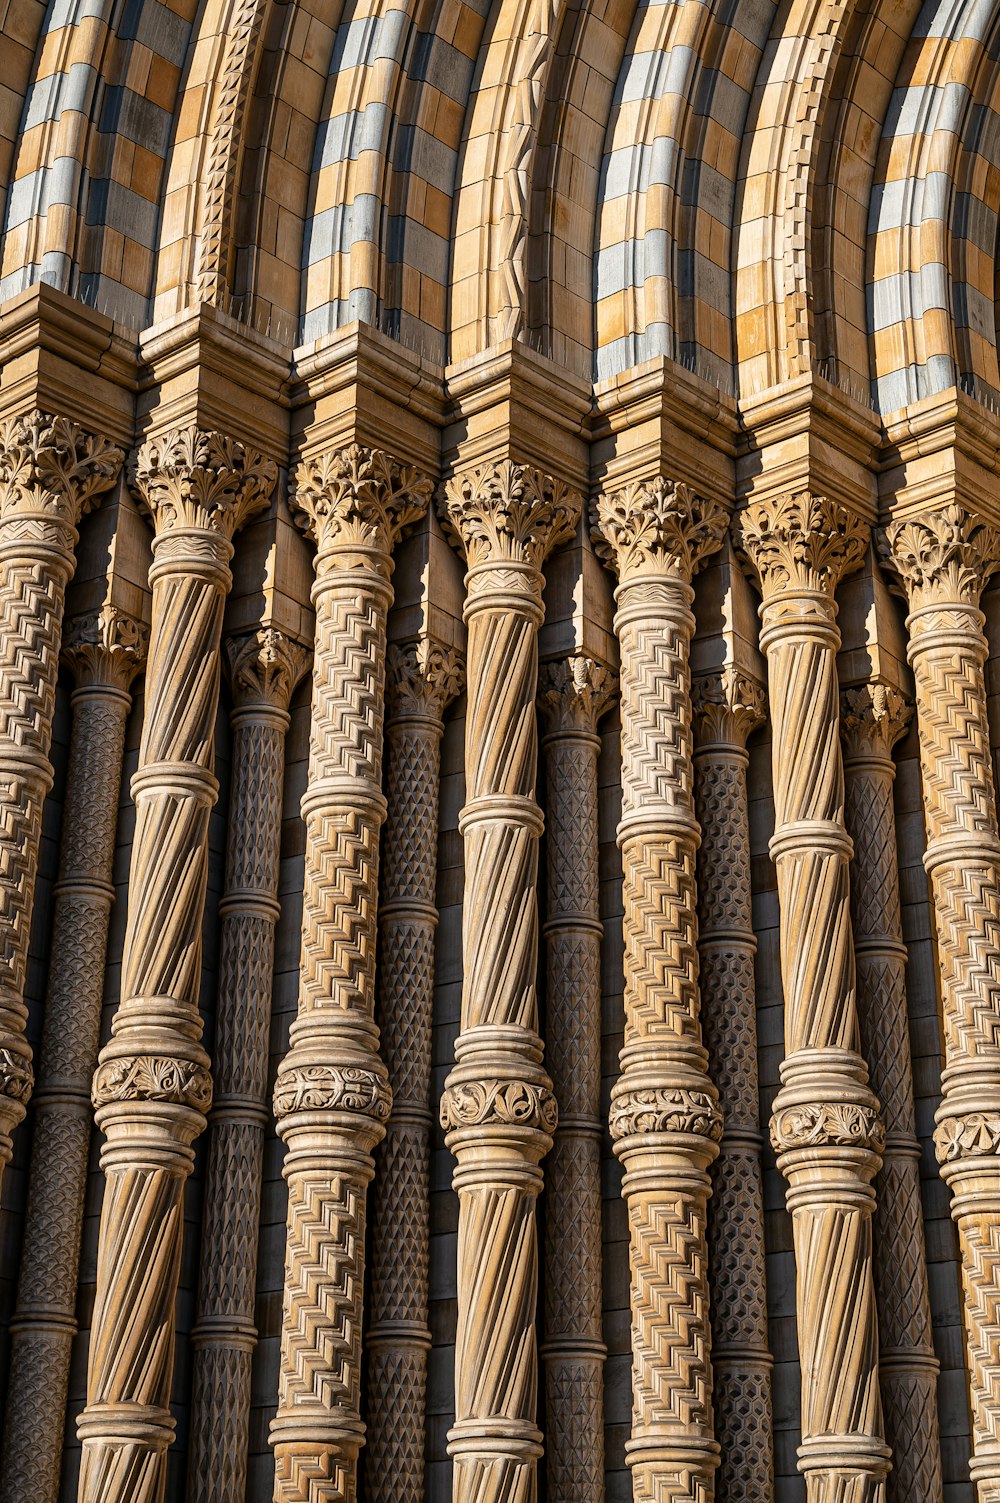 a close up of a very tall building with many pillars